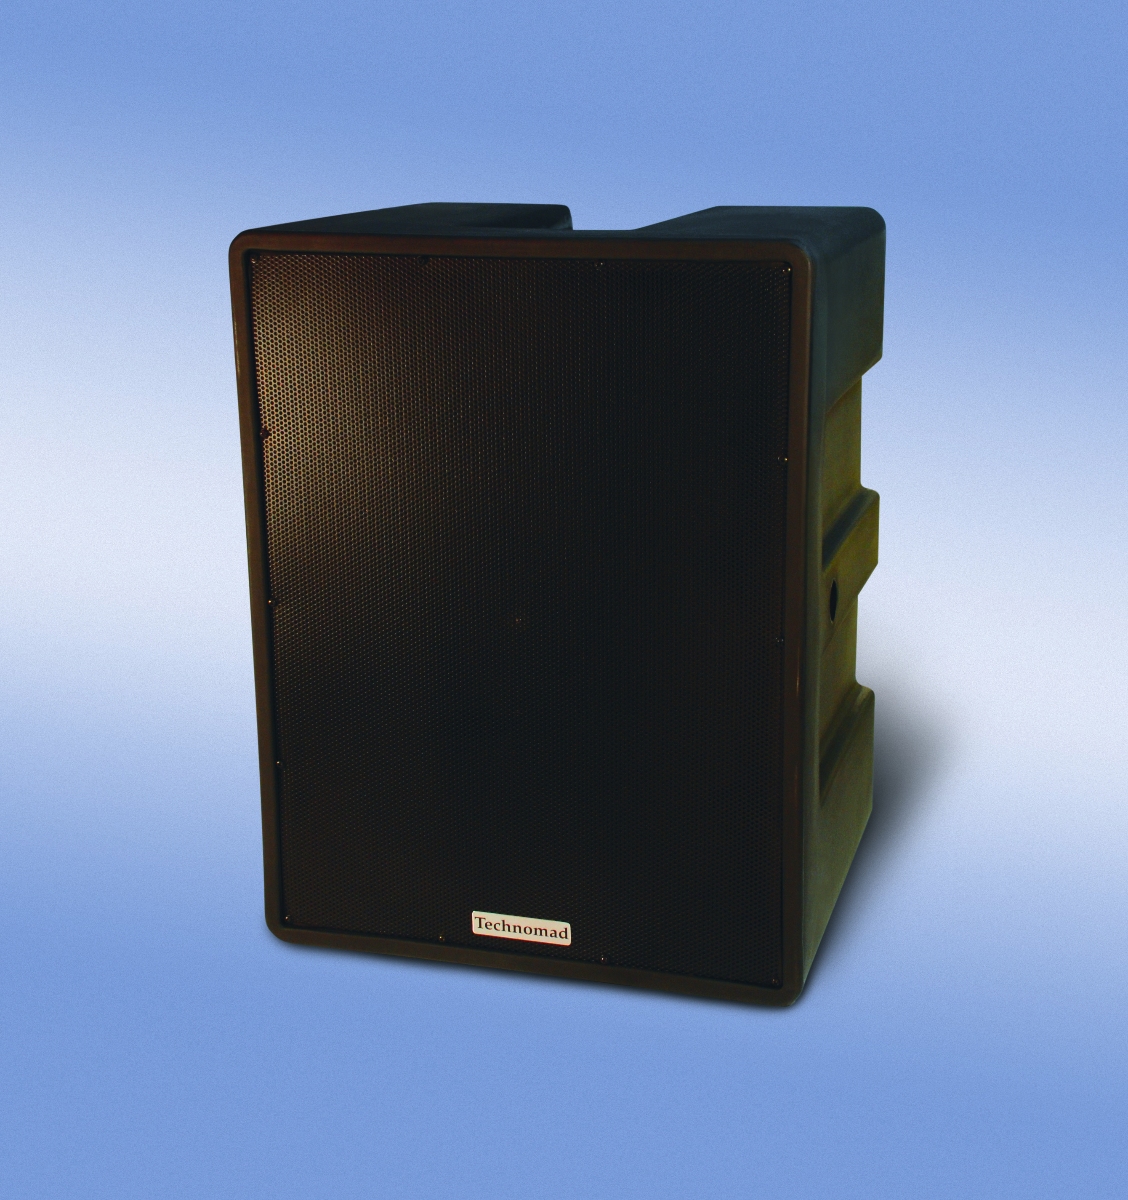 The Technomad Oslo subwoofer provides plenty of low-end bass response per the customer\'s wishes